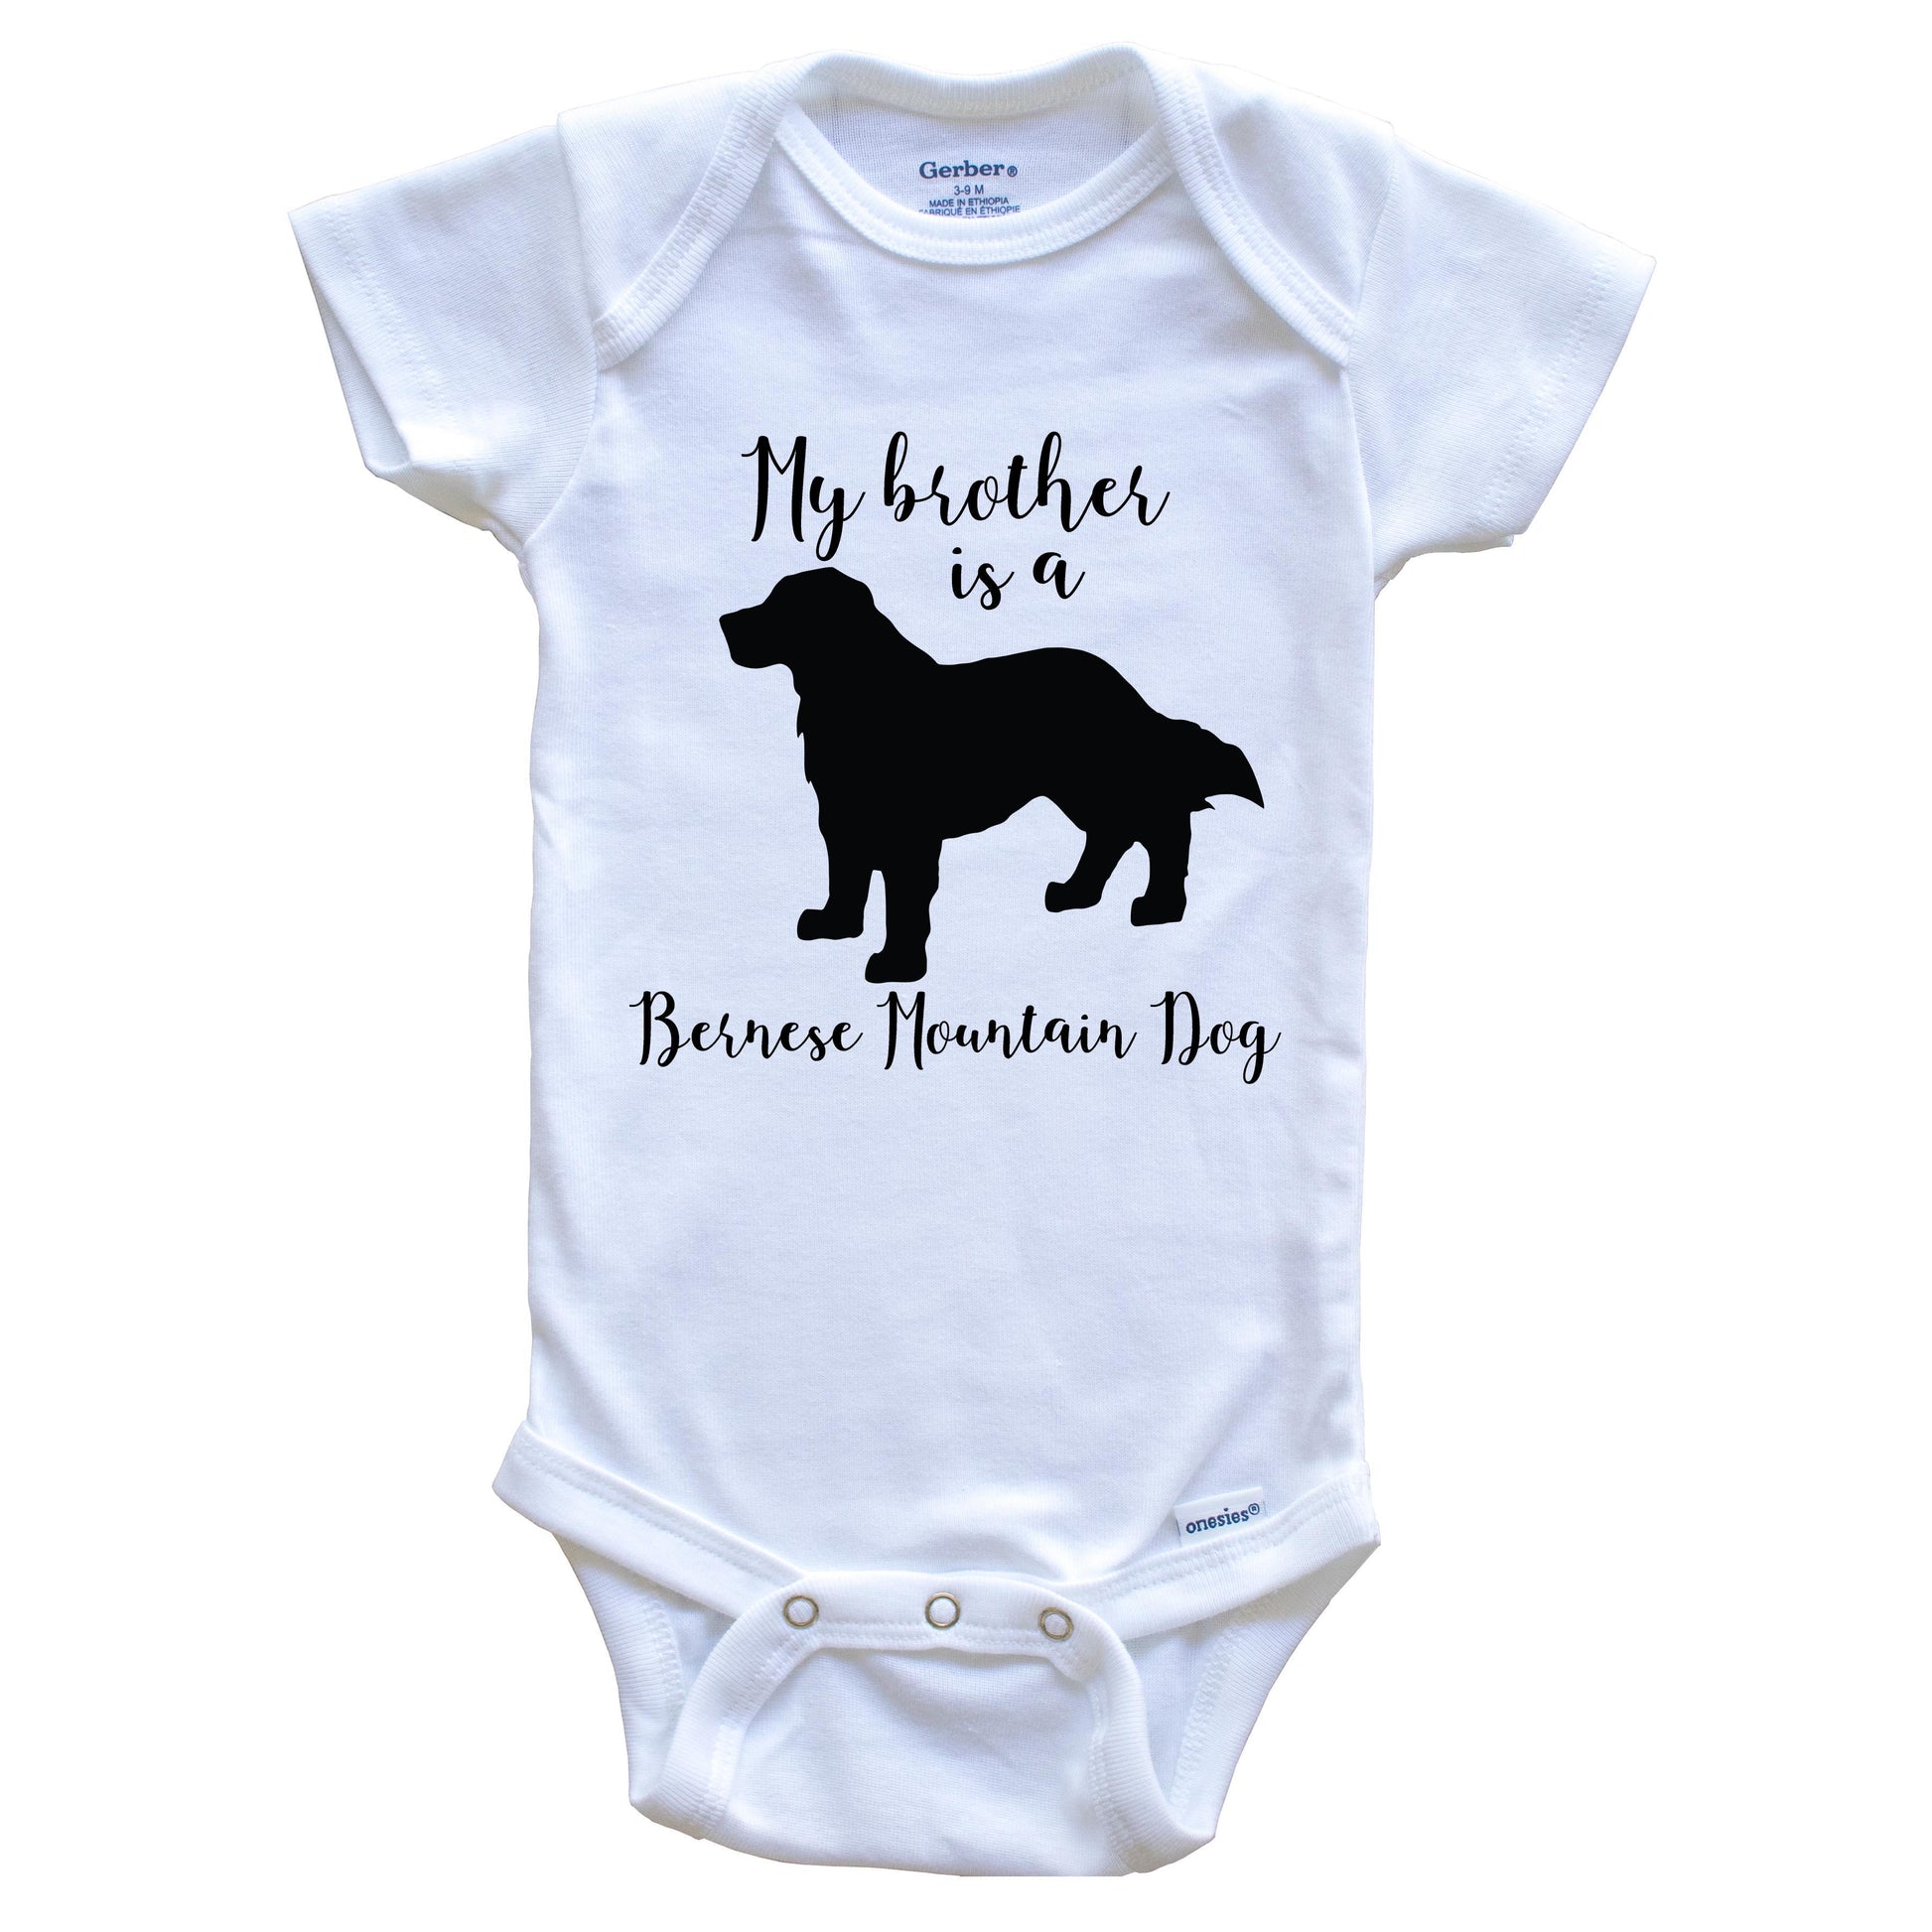 My Brother Is A Bernese Mountain Dog Cute Dog Baby Onesie - Bernese Mountain Dog One Piece Baby Bodysuit